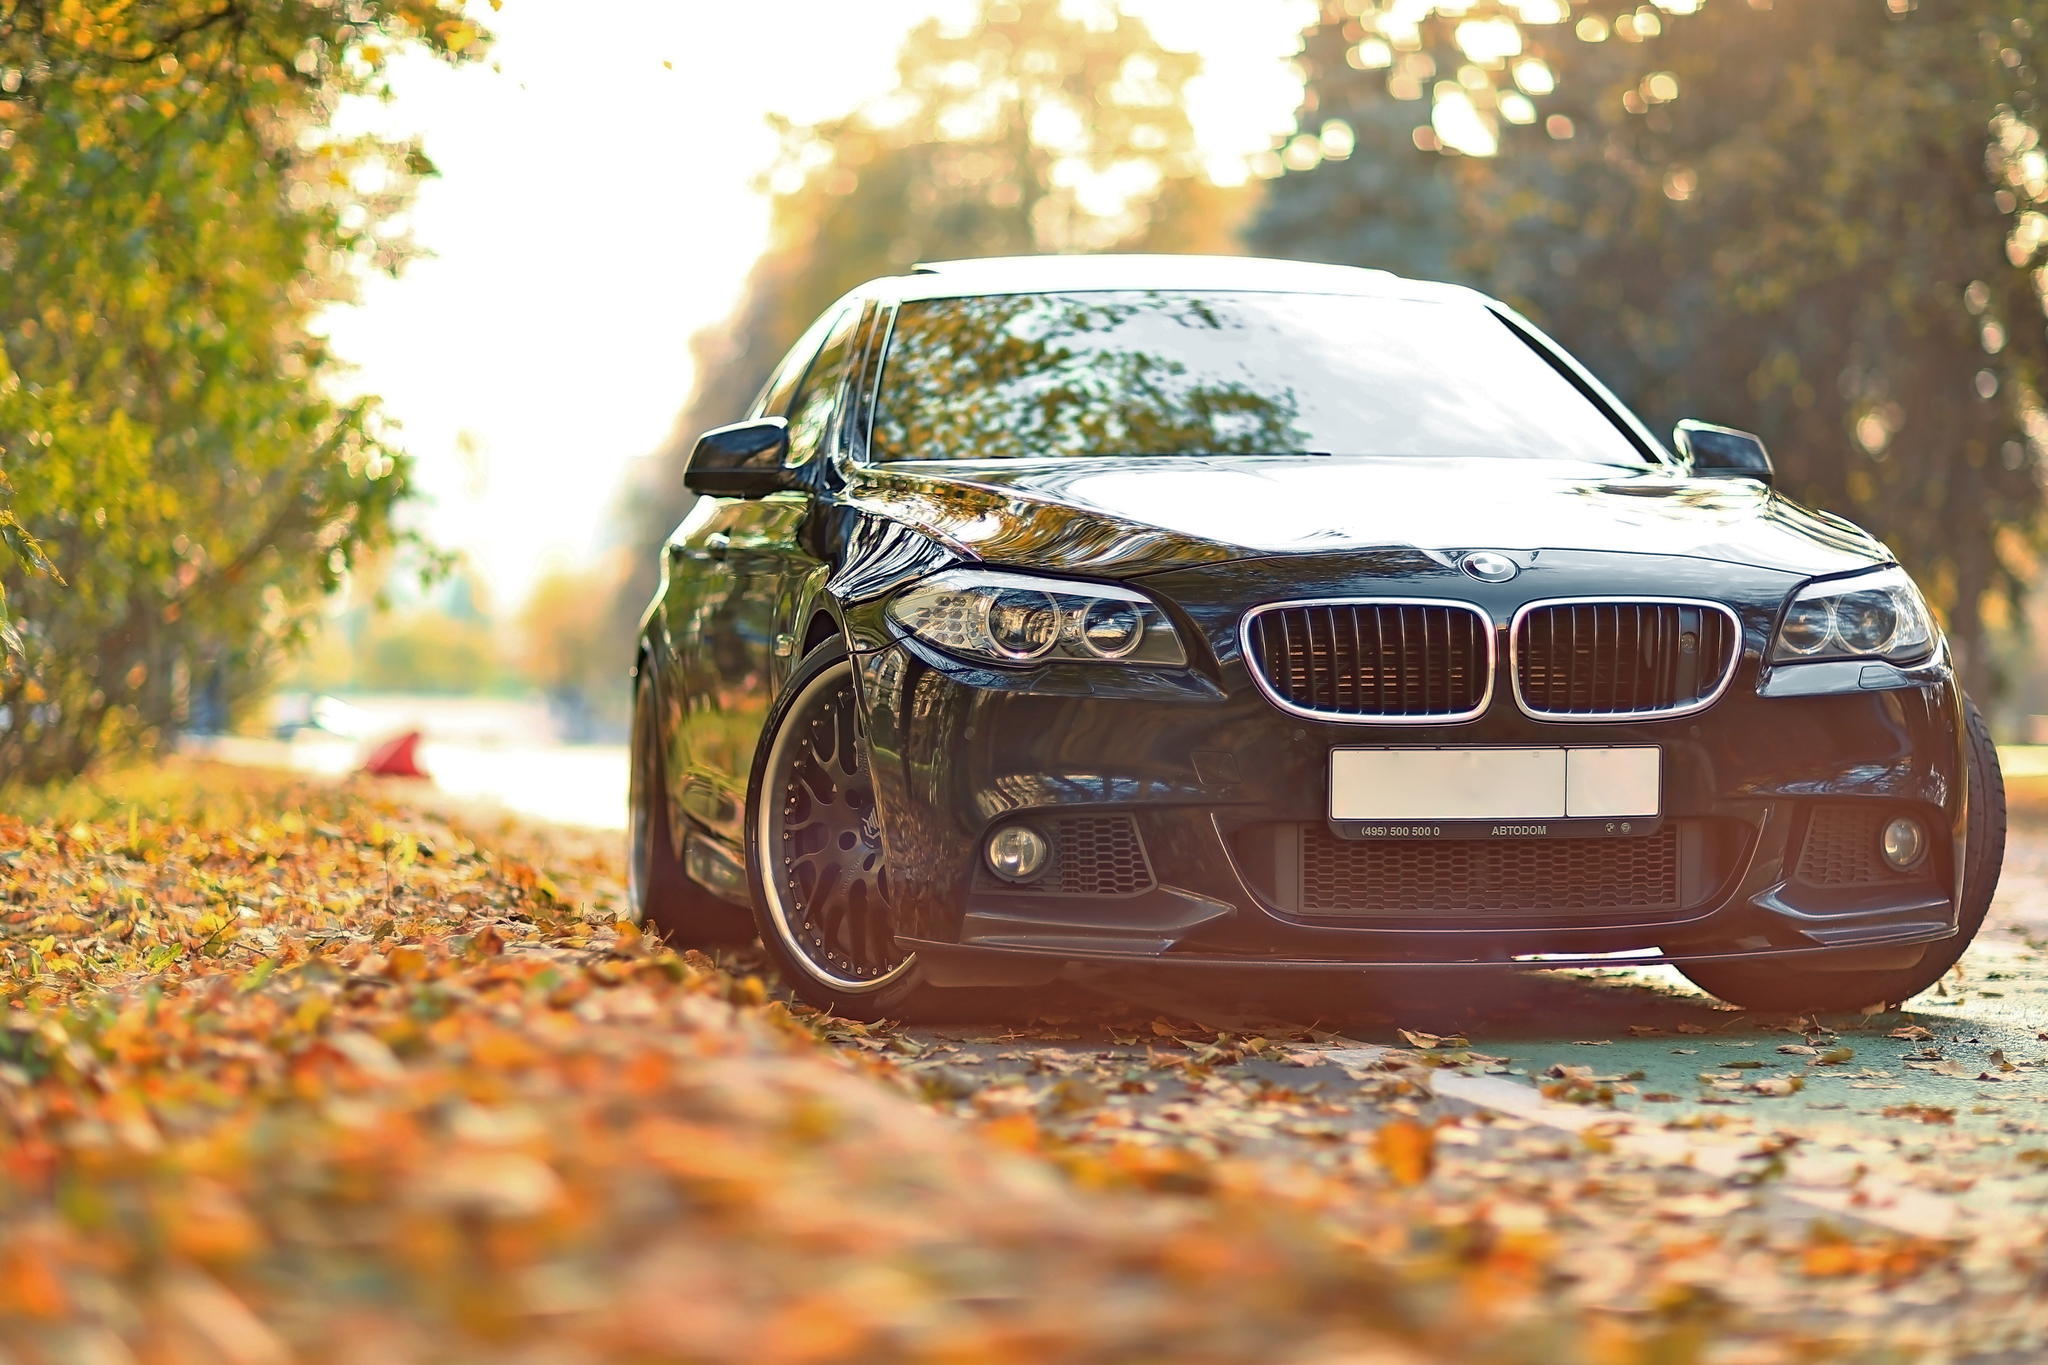 19 BMW 5 Series HD Wallpapers | Backgrounds - Wallpaper Abyss